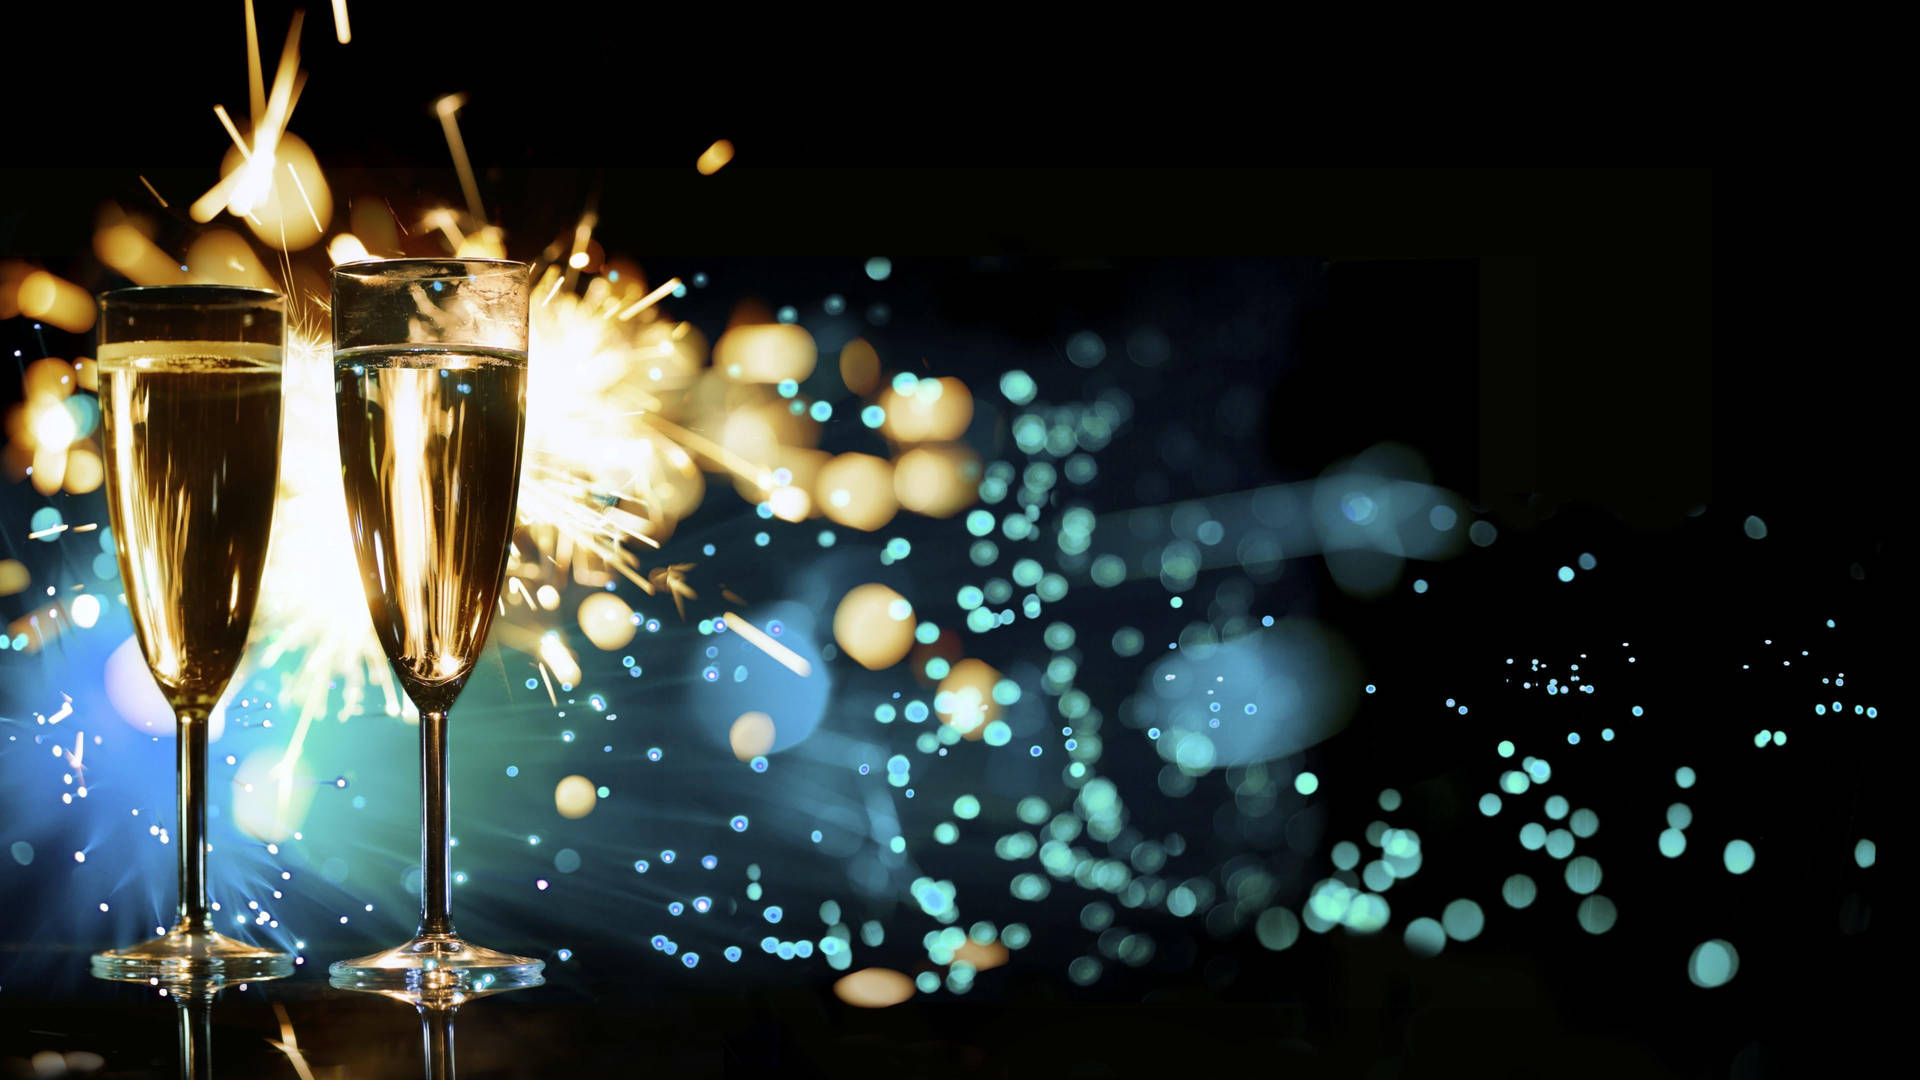 A Jubilant Celebration: New Year's Champagne And Fireworks